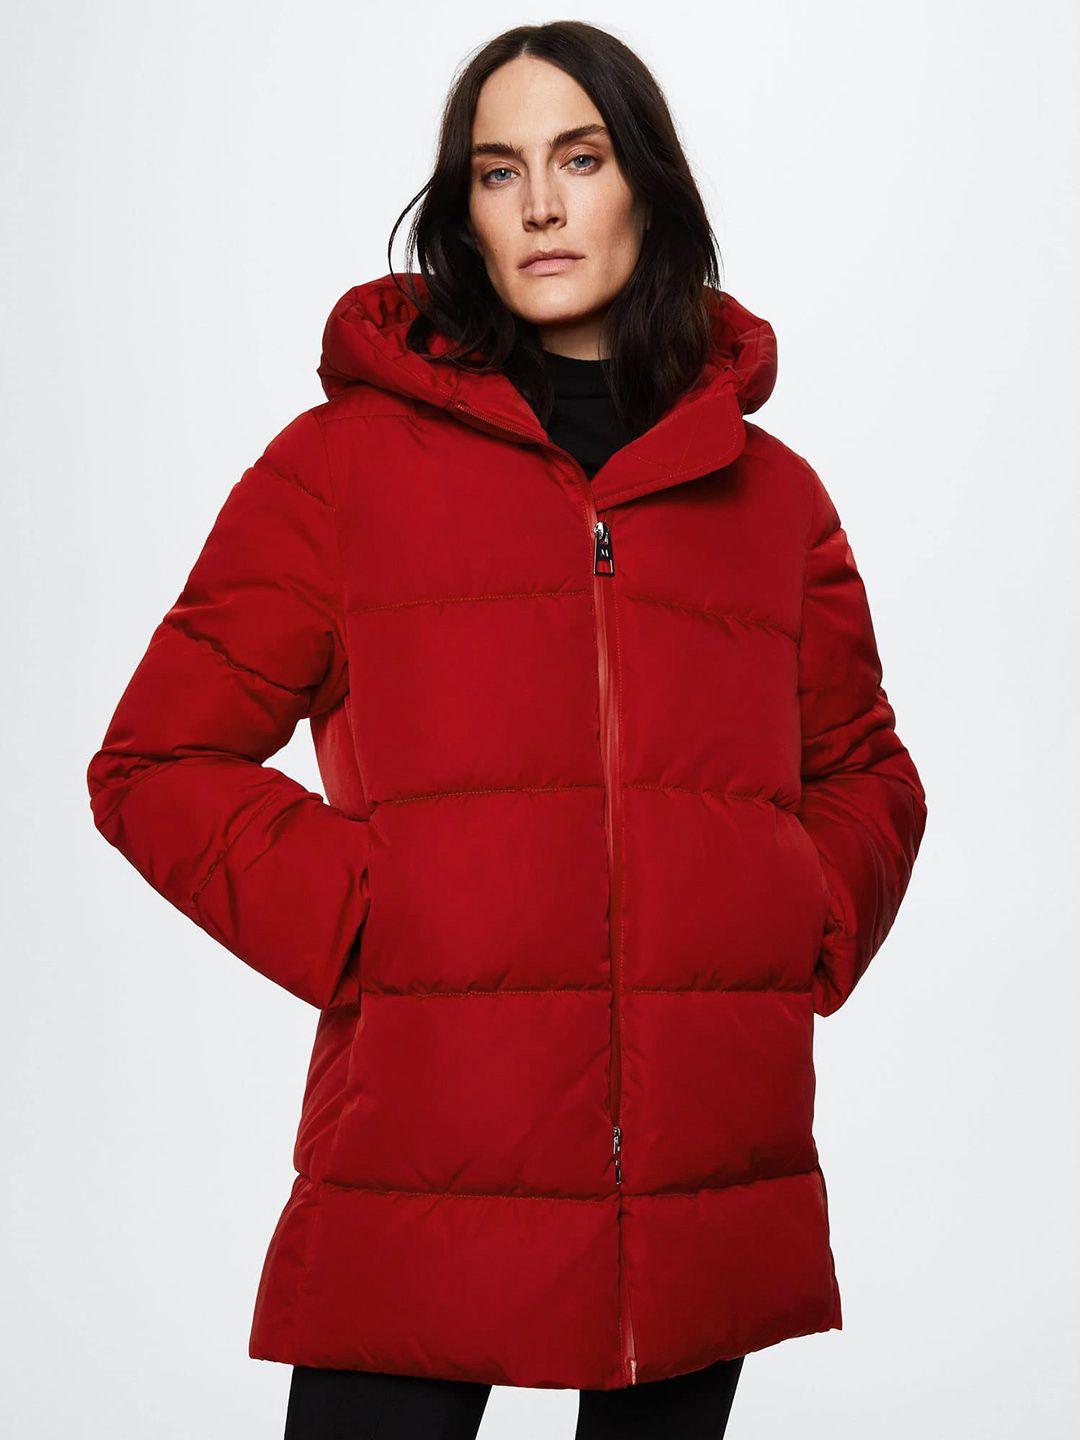 mango women red water resistant sustainable puffer jacket